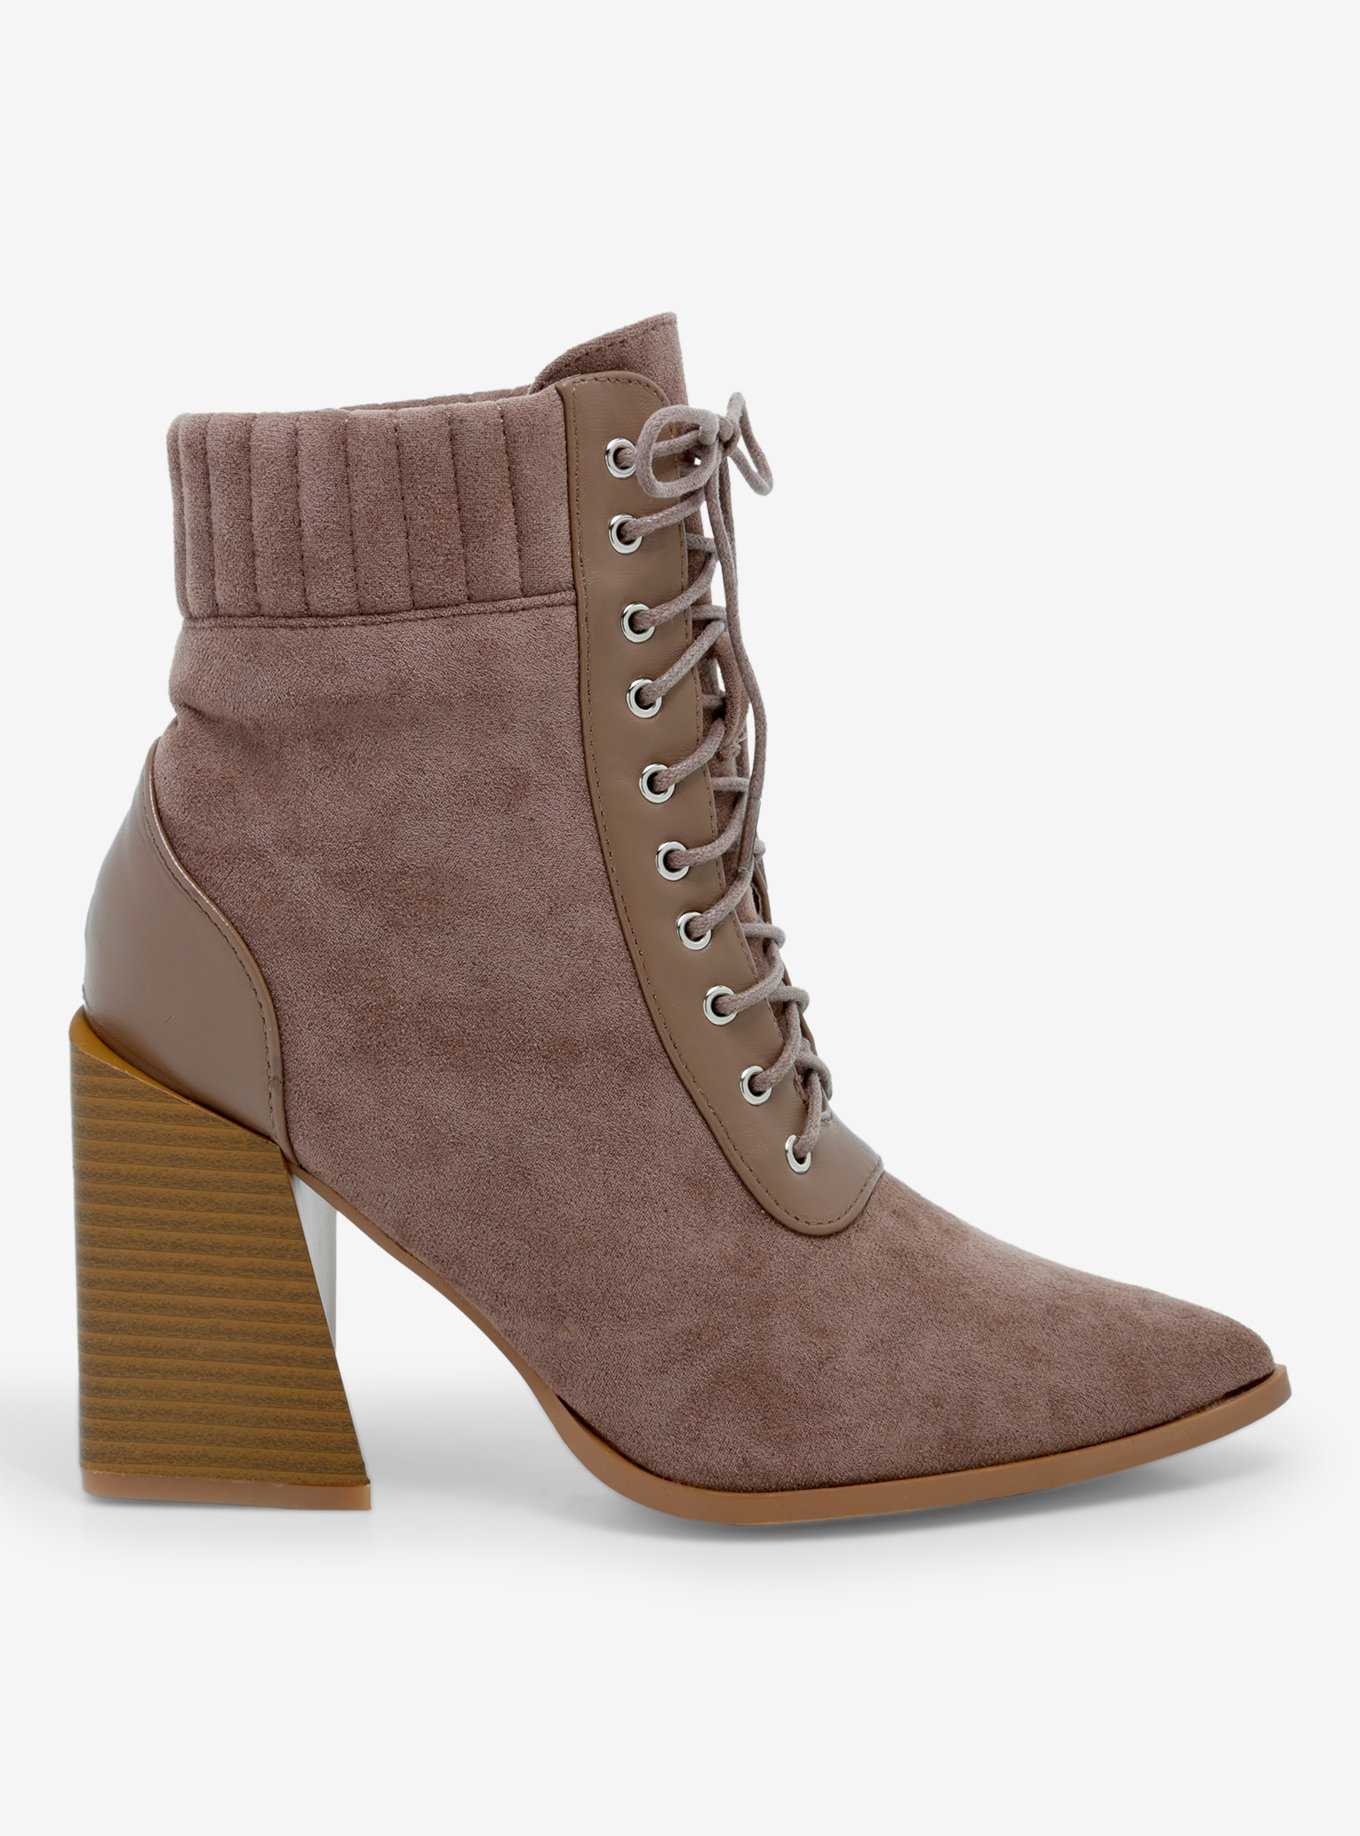 Yoki Beige Lace-Up Suede Ankle Boots, , hi-res